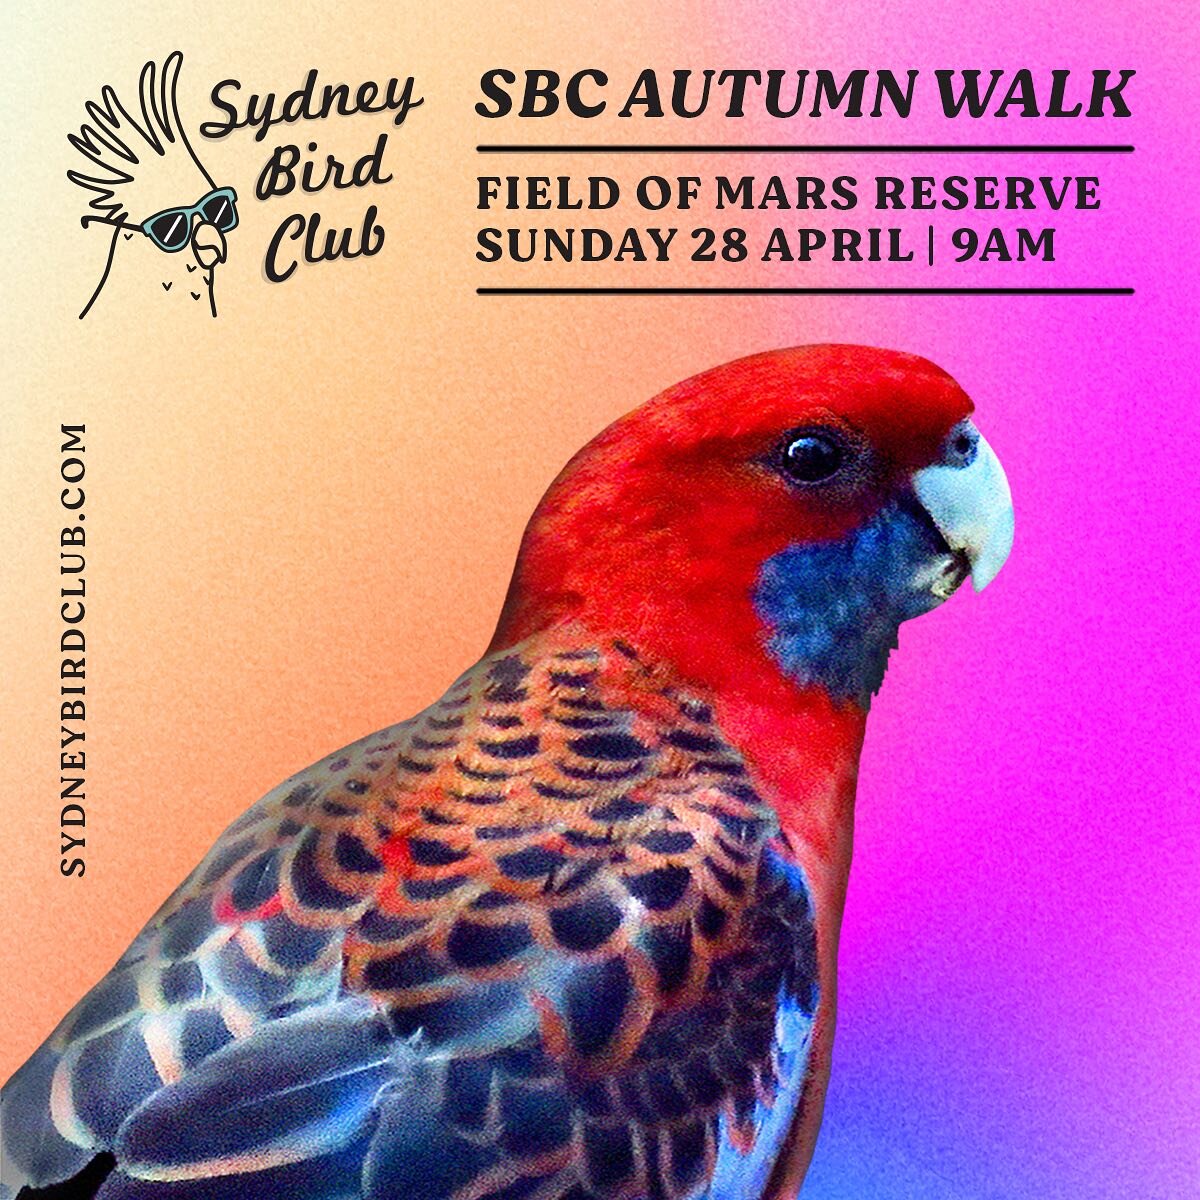 The Autumn Walk launched yesterday and booked out in record time!! ✨ Thank you to everyone who booked and if you missed out please add your name to the waitlist on the Sydney Bird Club website 🐦 

We did move quite a few people off the waitlist for 